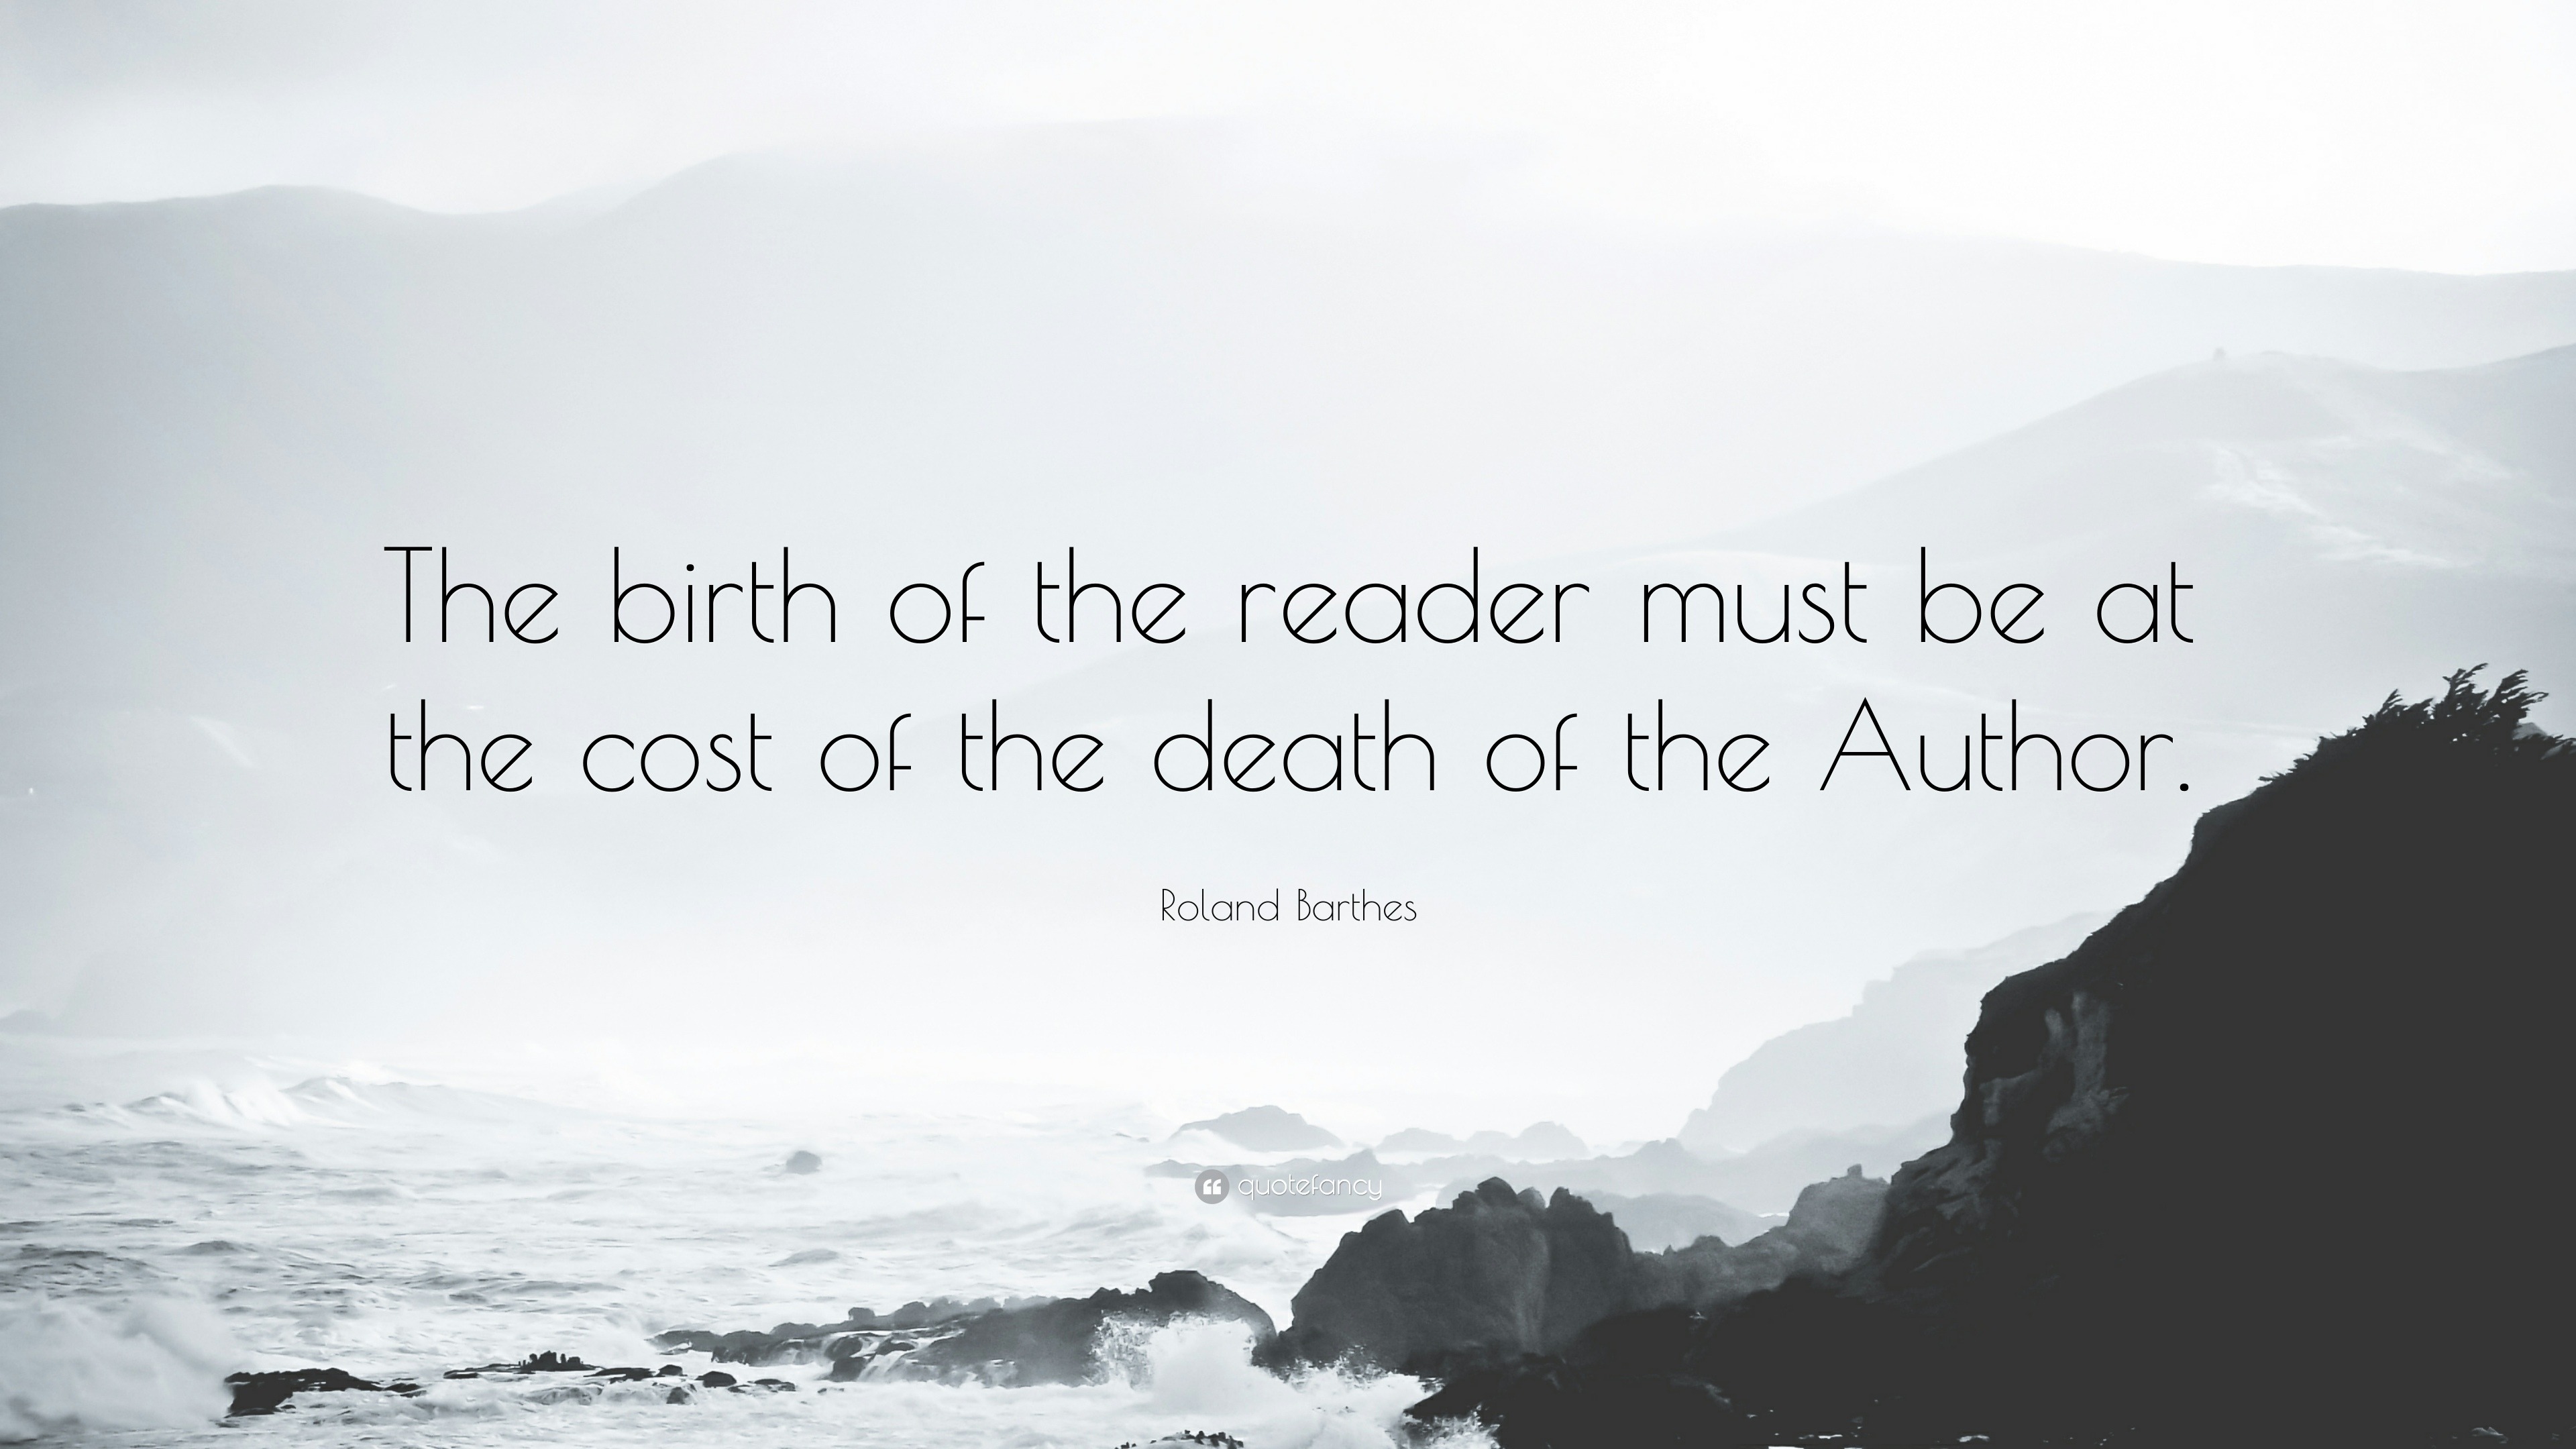 Roland Barthes Quote: “The Birth Of The Reader Must Be At The Cost Of The Death